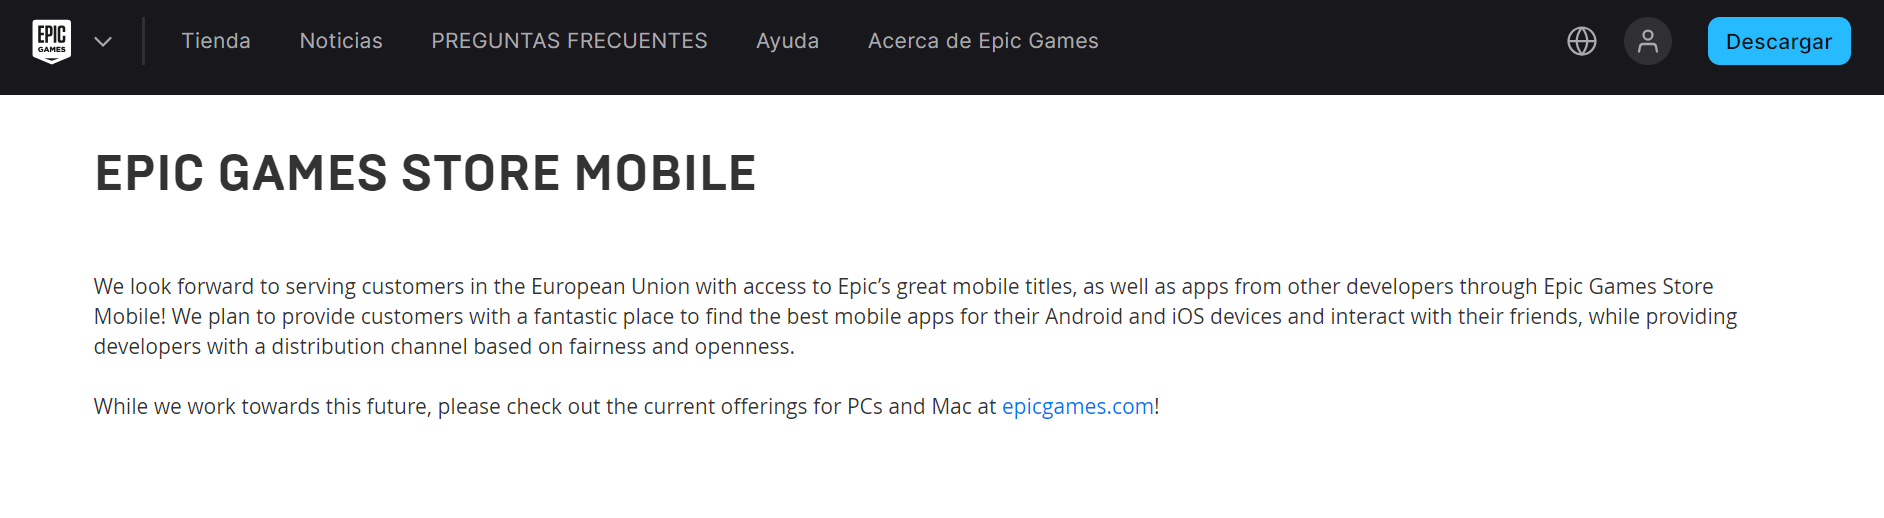 Epic Game Store Mobile pour Android